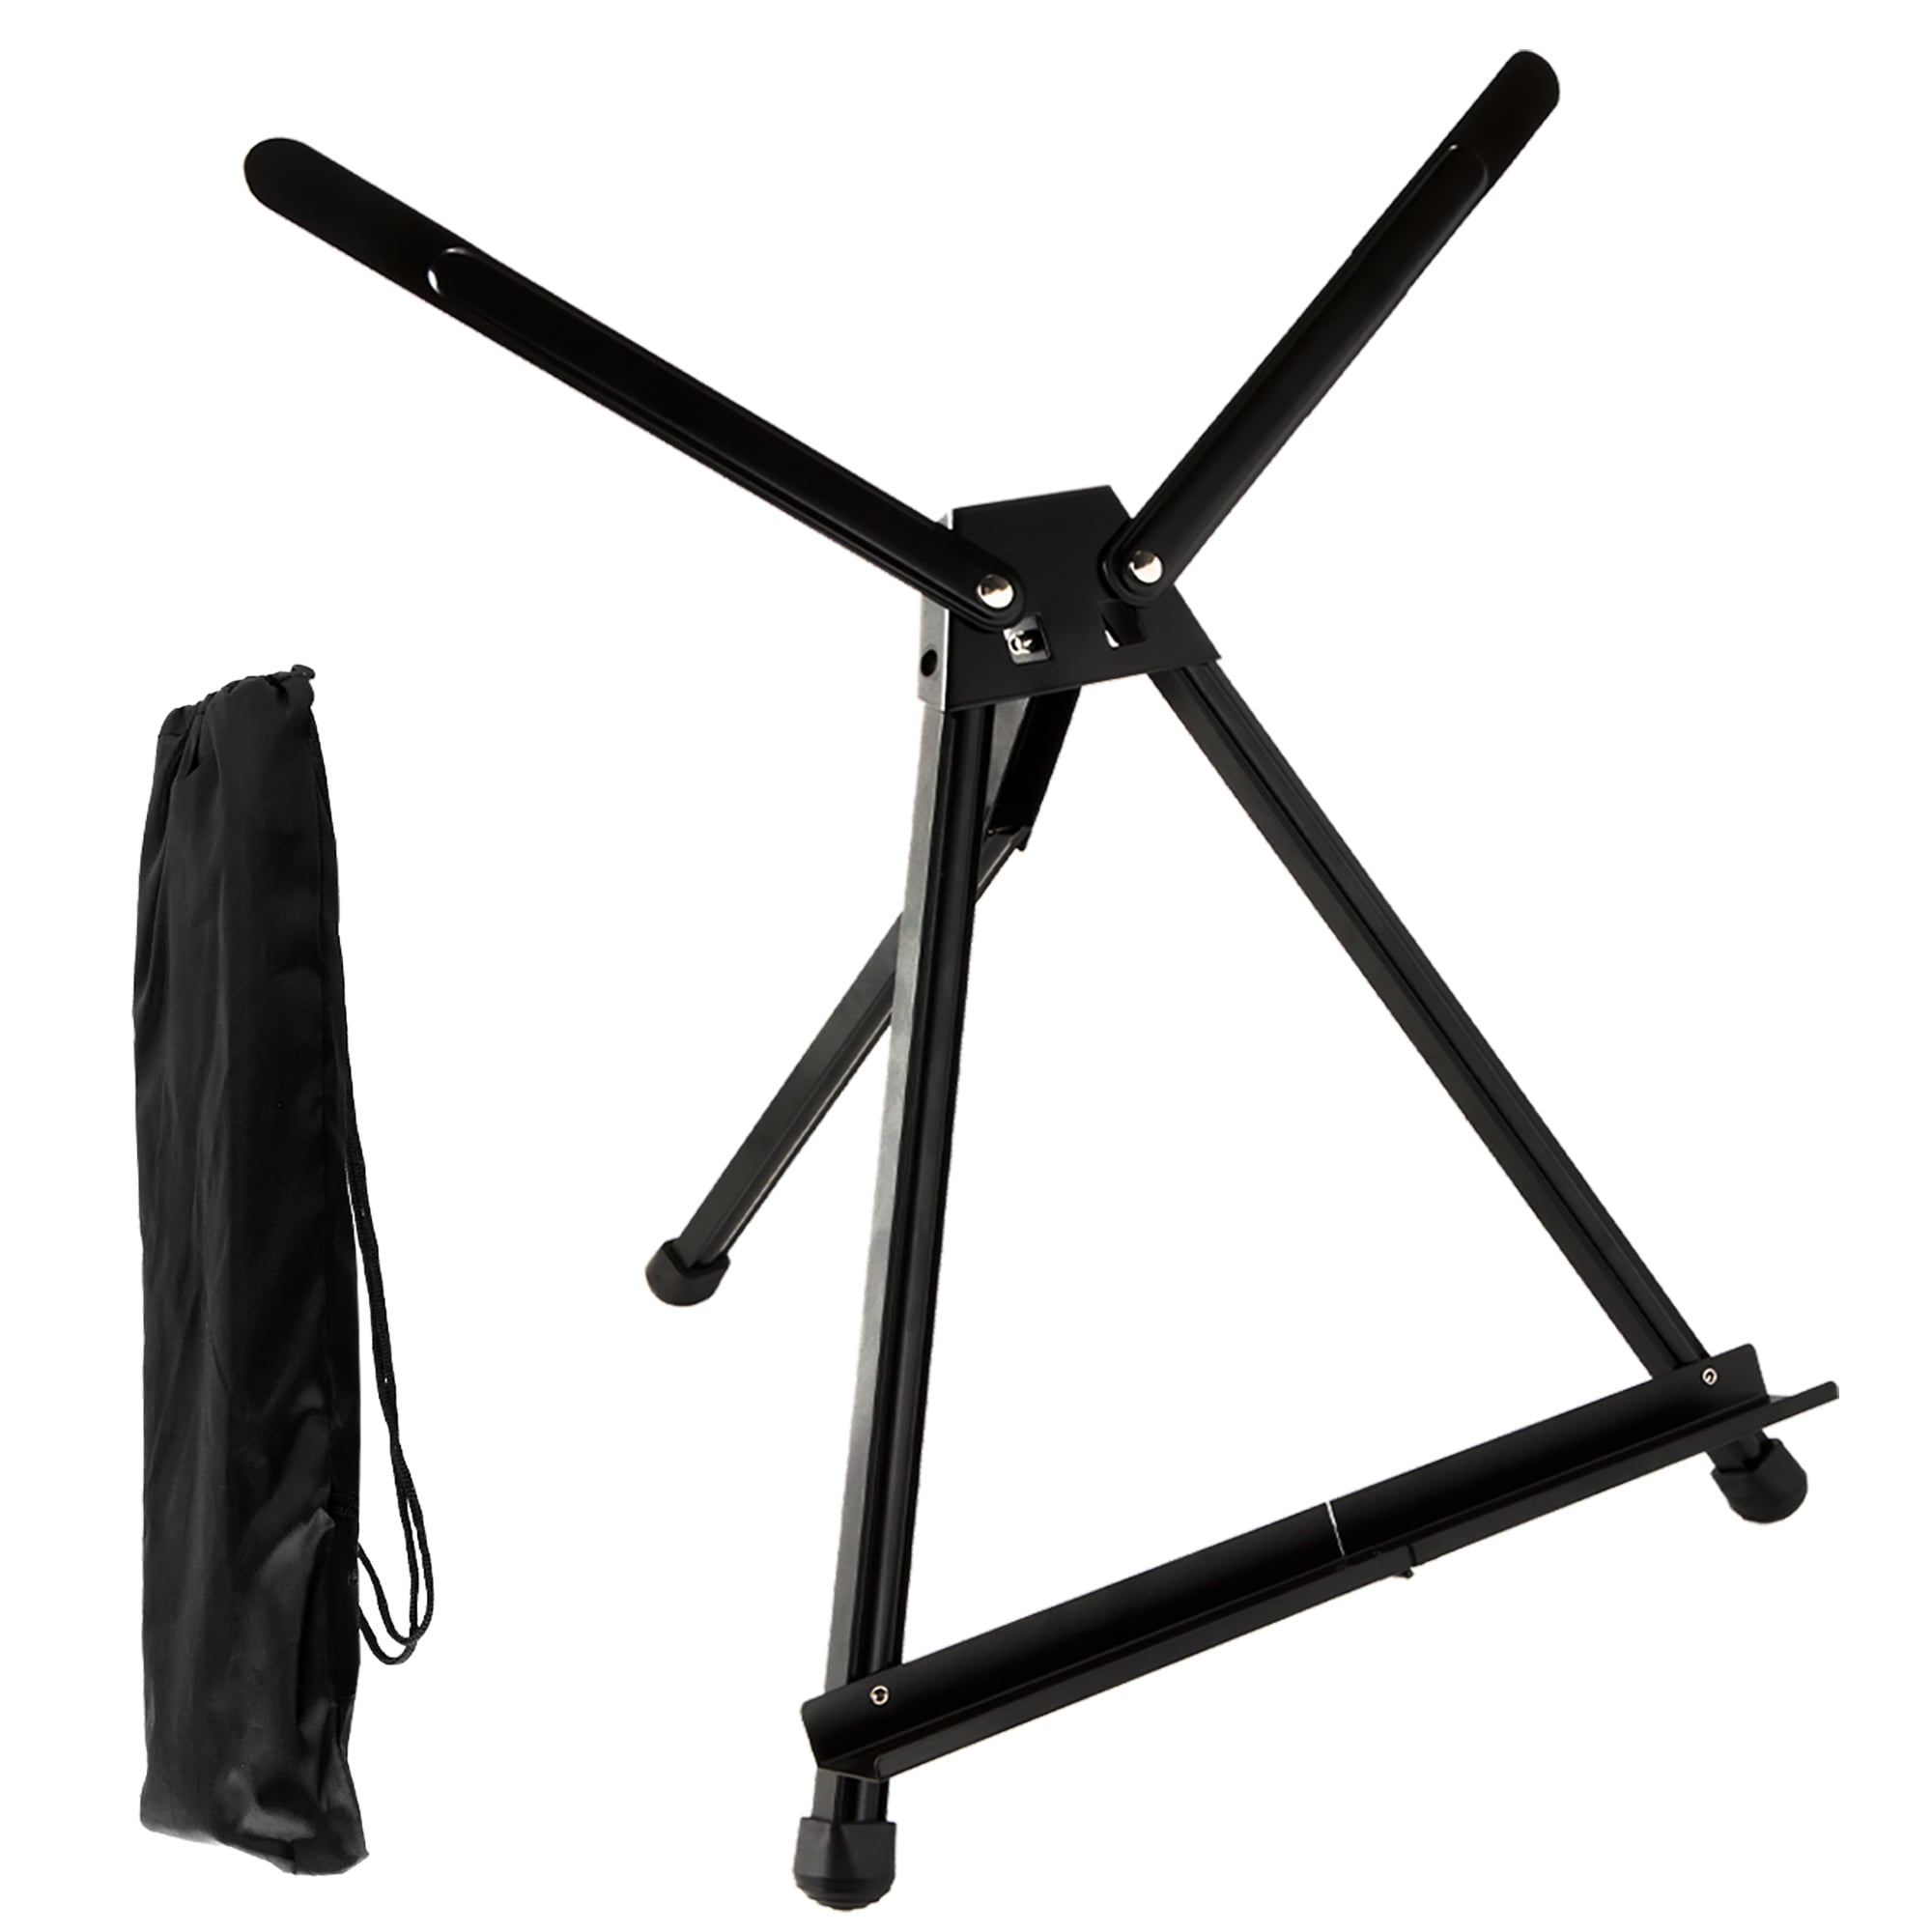 SoHo Urban Artist Black Aluminum Tabletop Easel Stand, Portable Easel for  Display, Painting Canvas and More, Set of 3 